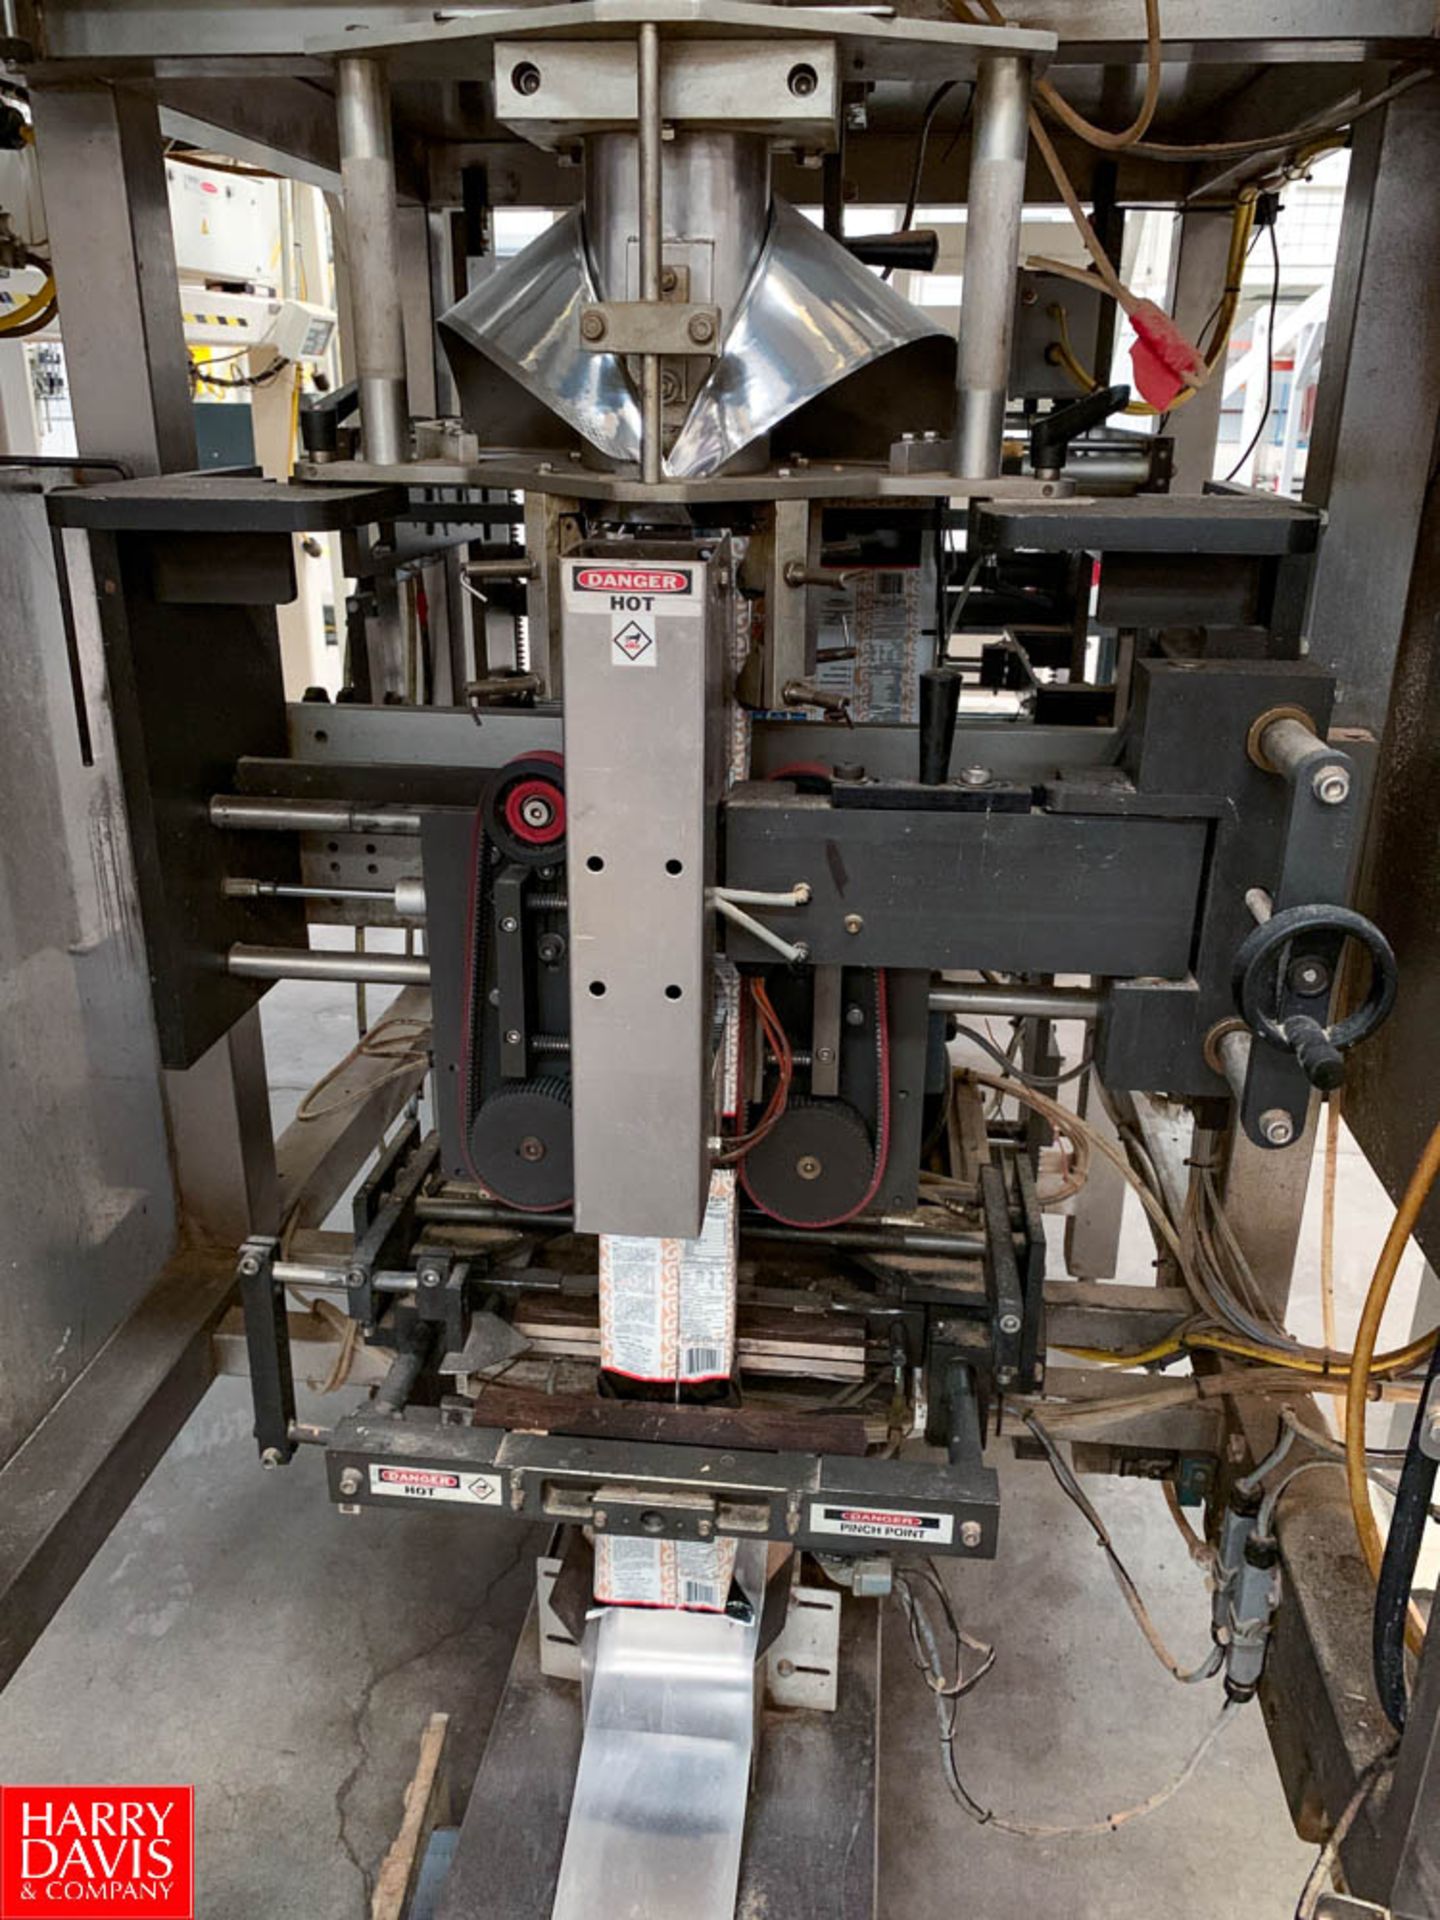 2013 Matrix Vertical Form Fill and Seal Packaging Machine Model 201315SFXRYX : SN 500100MSB01389 - Image 2 of 2